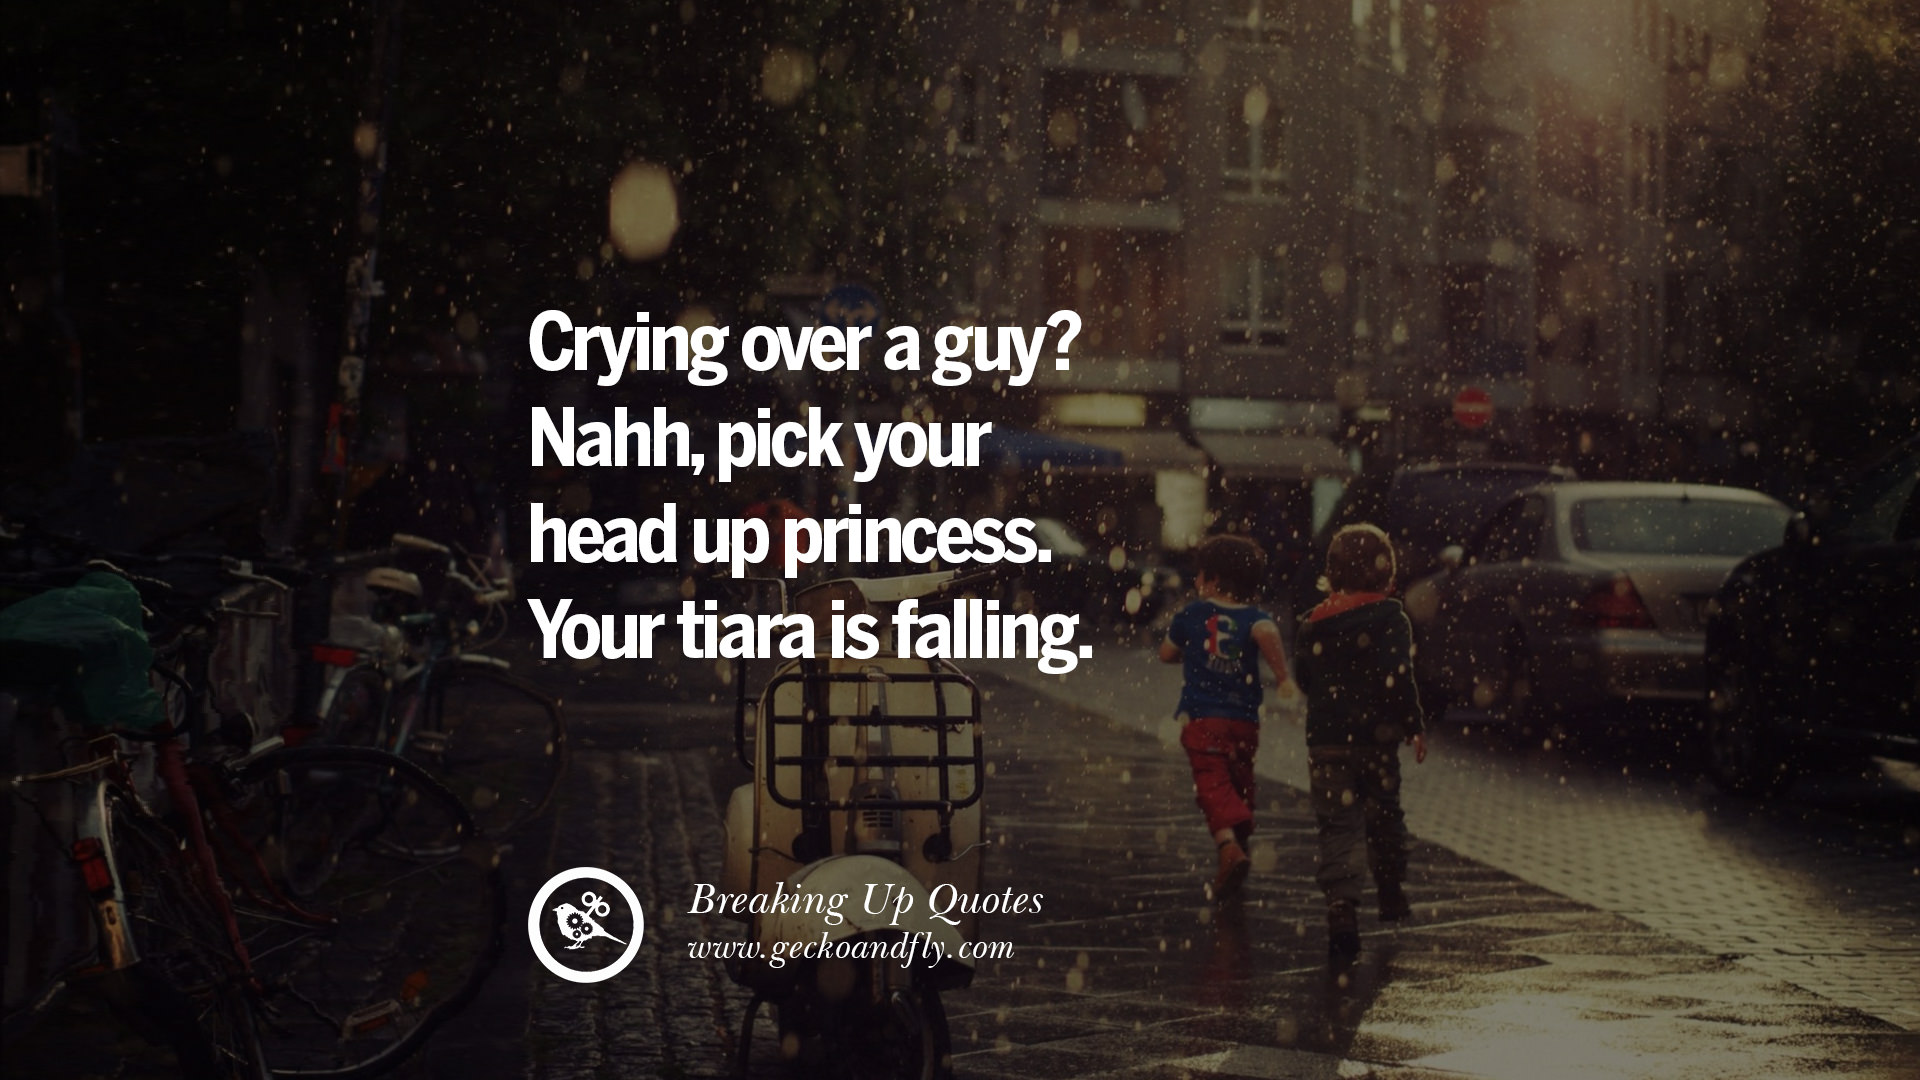 40 Quotes On Getting Over A Break Up After A Bad Relationship from cdn4.gec...